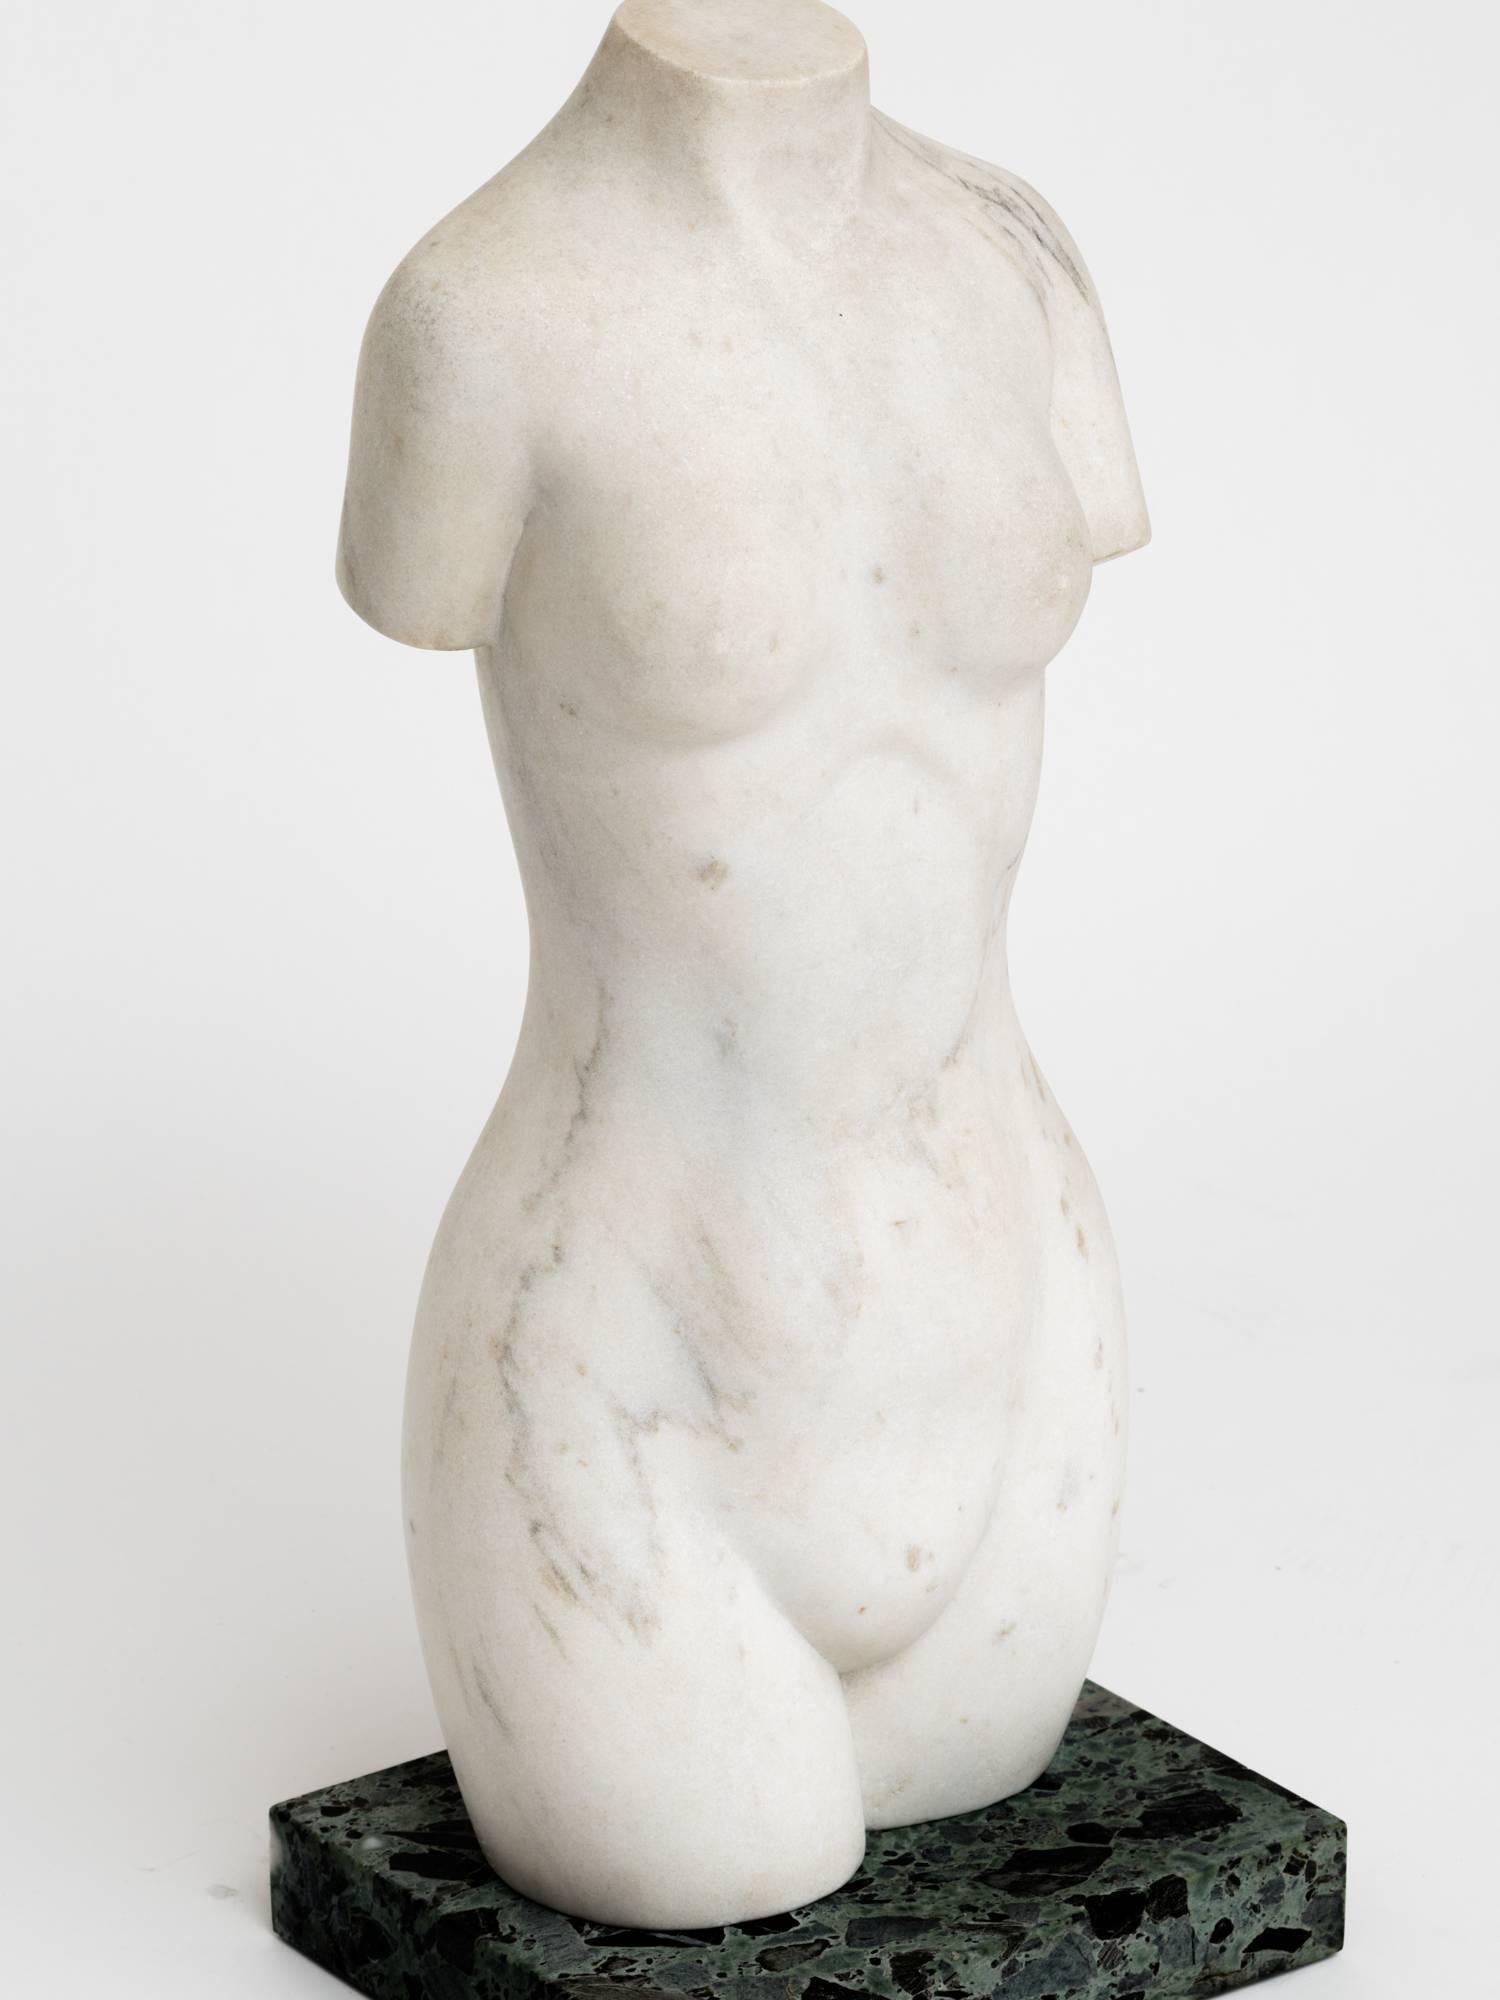 Classical modern marble female torso sculpture on green marble base by master sculptor Shi Jia Chen. Signed and dated 1993.

Shi Jia Chen was born in China. In 1980 he left Shanghai for the United States to pursue his study in sculpture. 
Upon